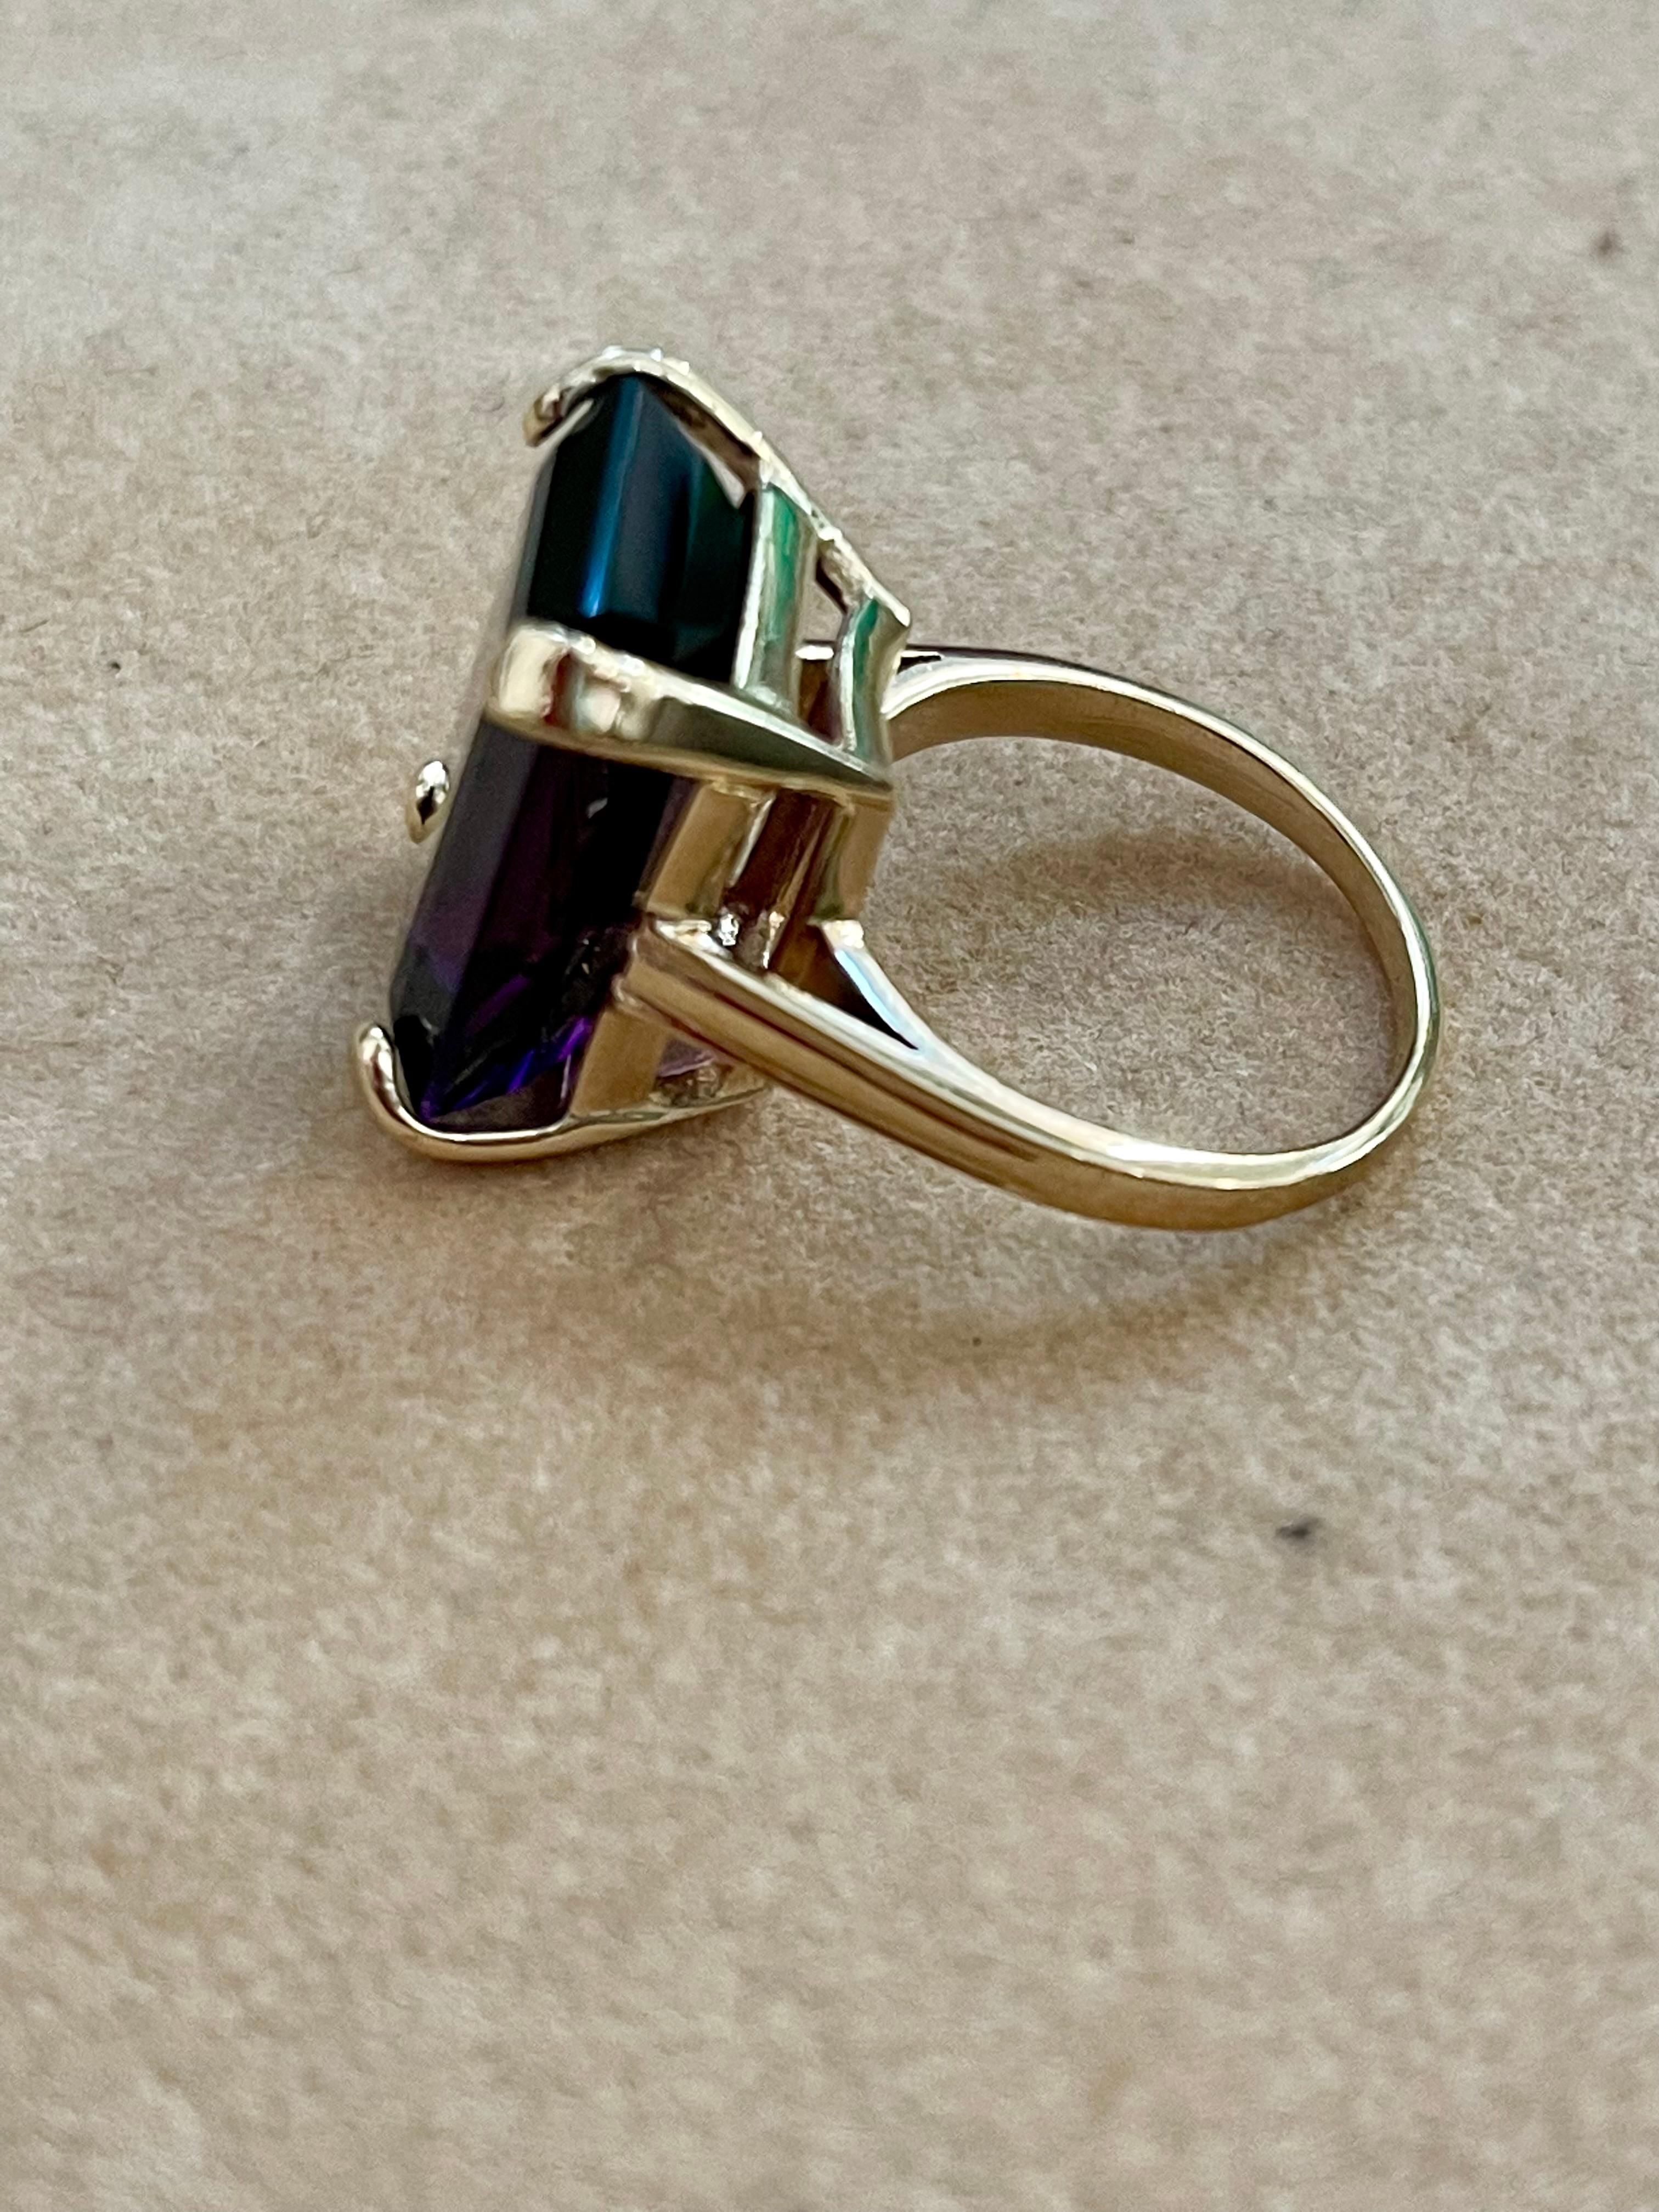 15 Carat Emerald Cut Amethyst Cocktail Ring in 14 Karat Yellow Gold For Sale 1